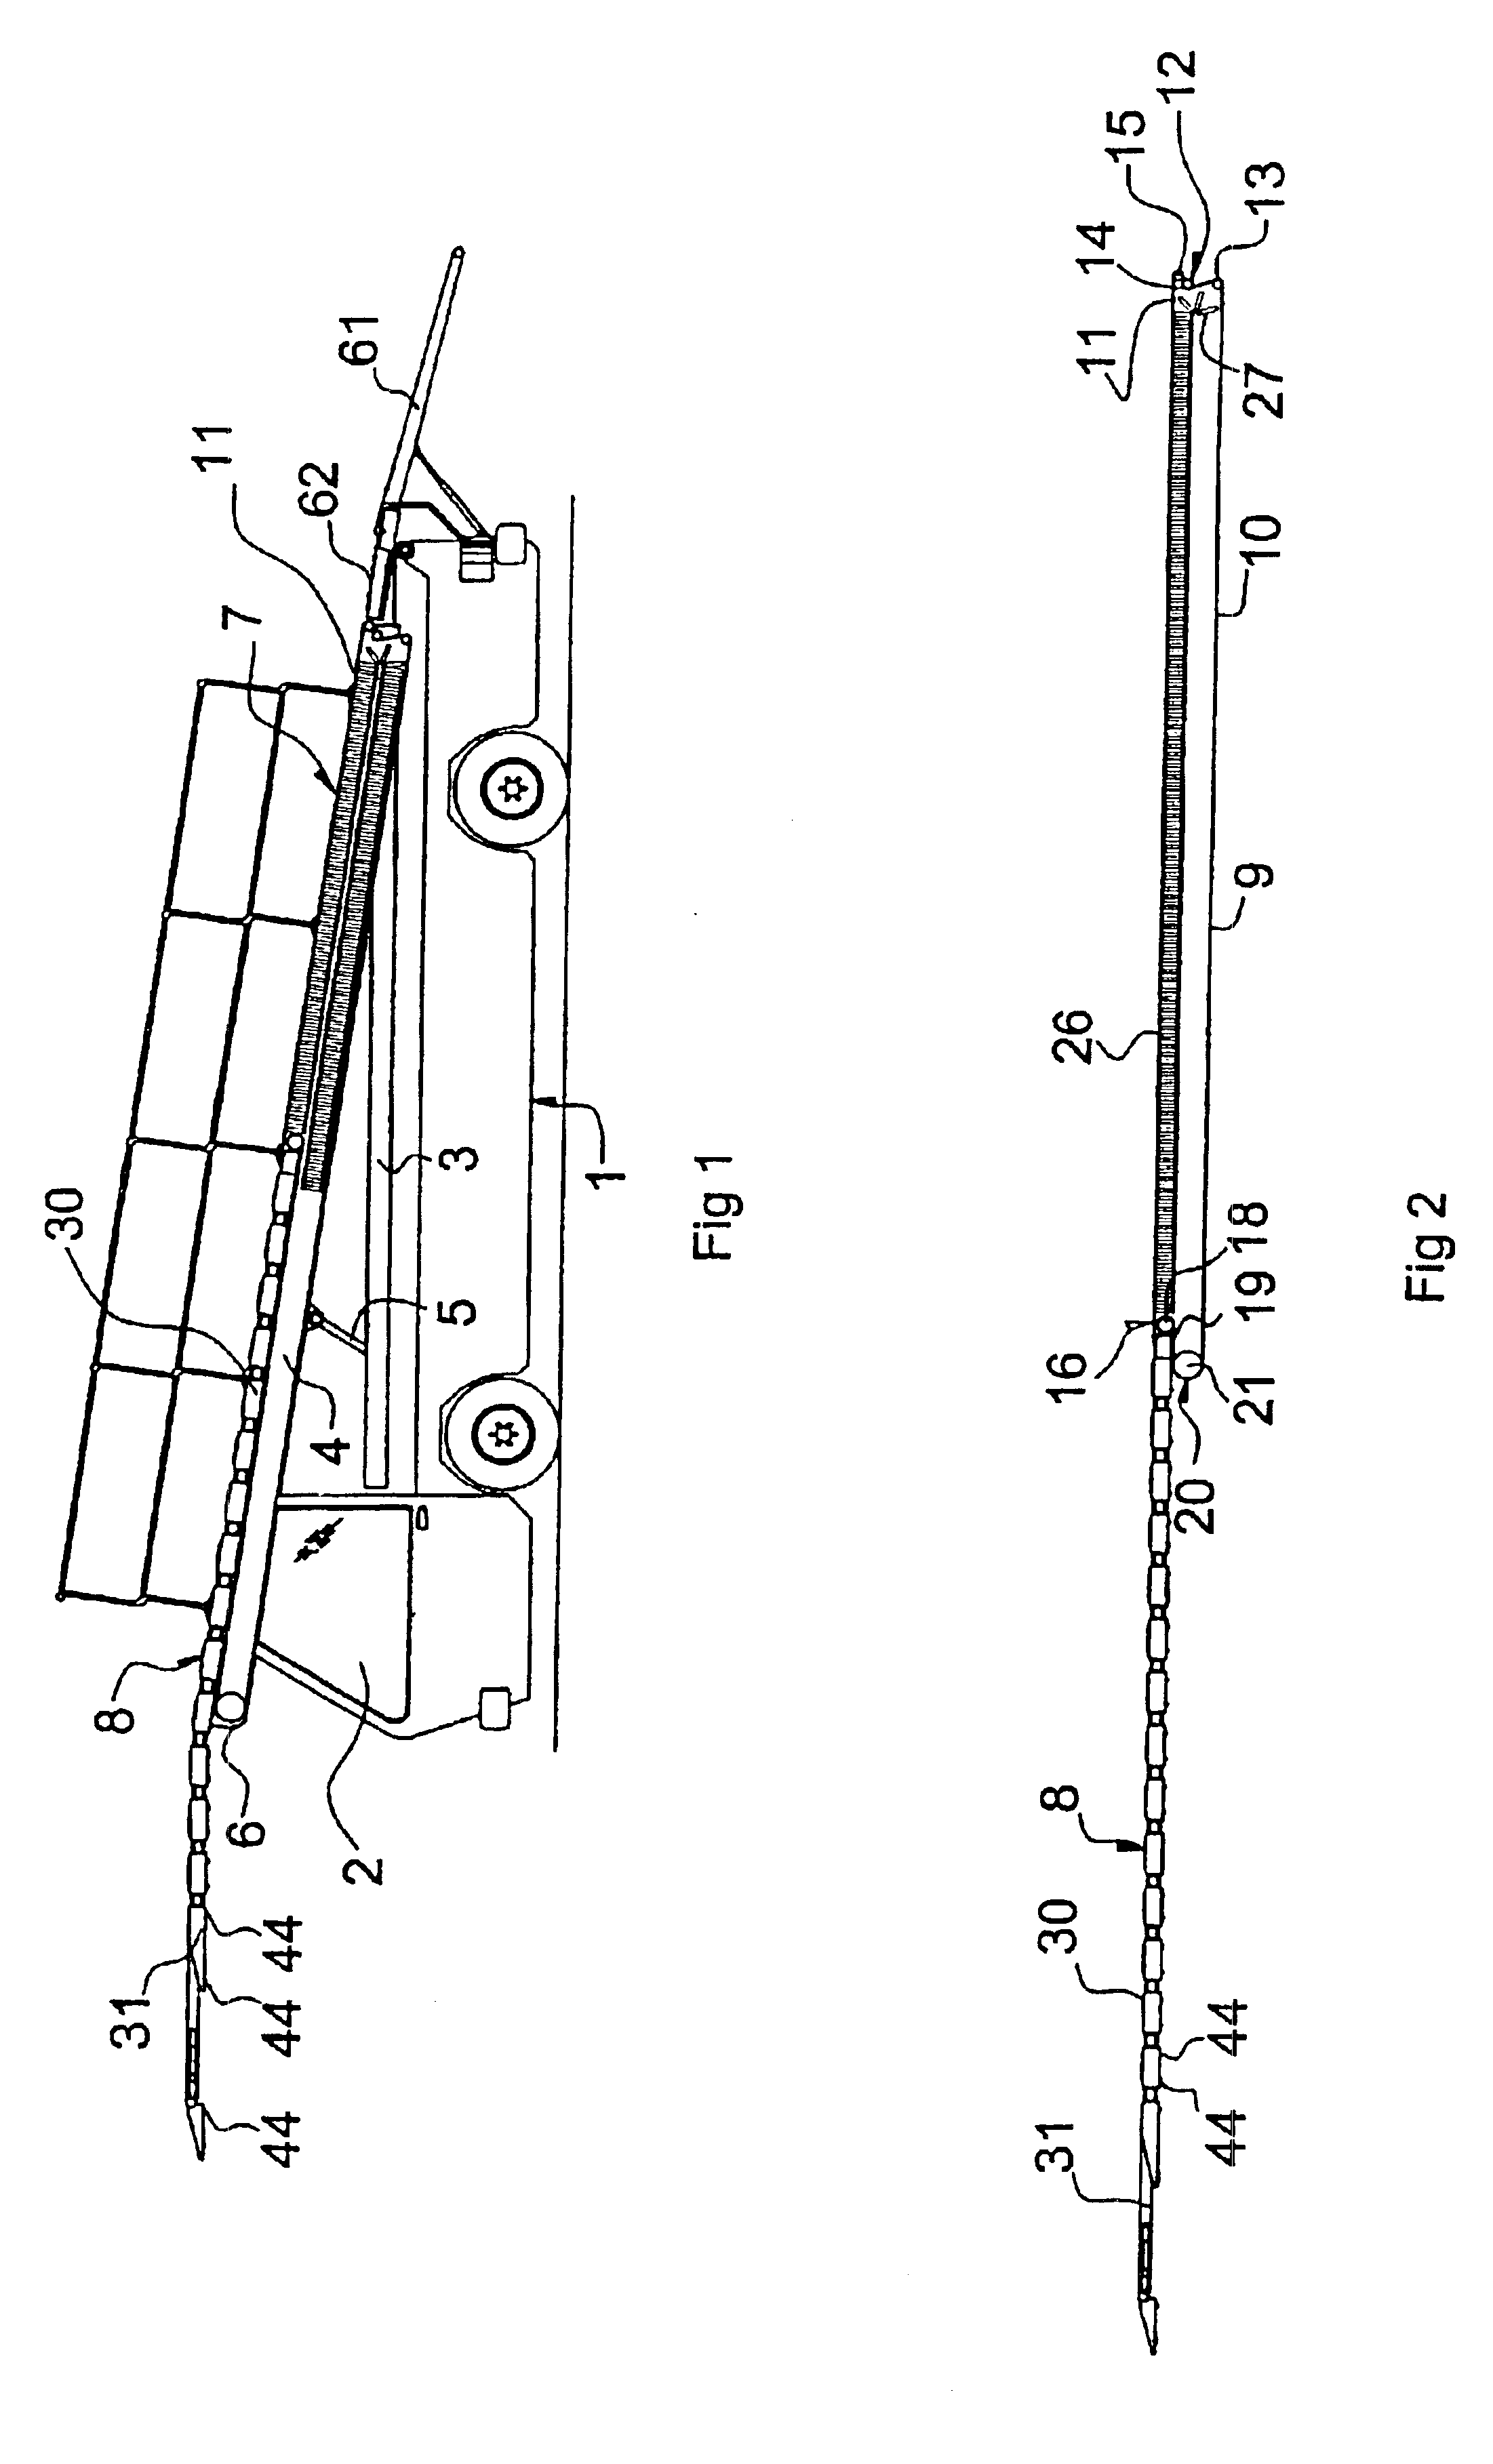 Apparatus for loading and unloading aircrafts